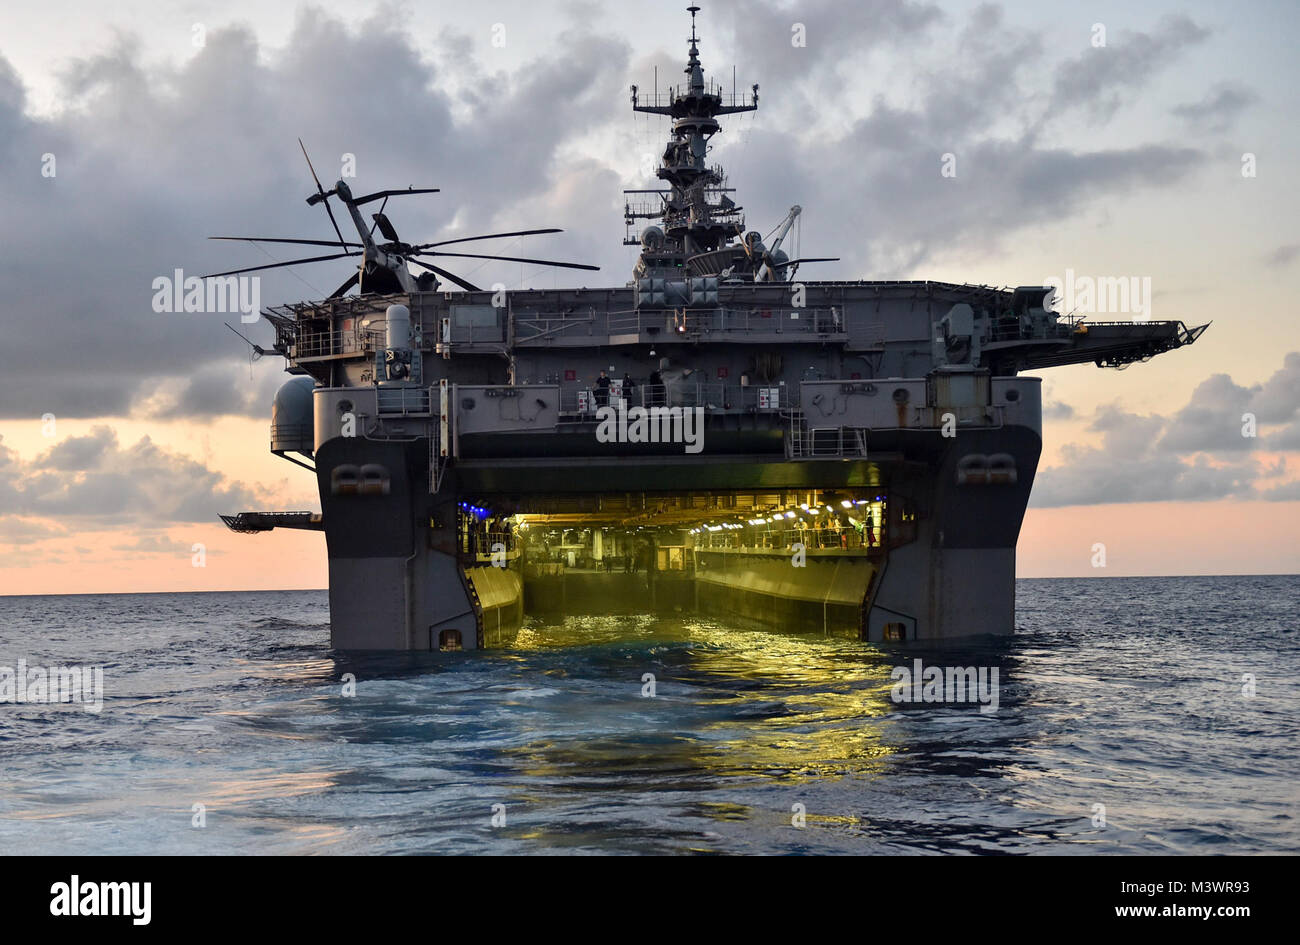 170915-N-PC620-0009 ATLANTIC OCEAN (Sept. 15, 2017) The amphibious assault ship USS Iwo Jima (LHD 7) as seen from Landing Craft Unit 1643, attached to Assault Craft Unit (ACU) 2, during humanitarian assistance efforts following Hurricane Irma’s landfall in Key West, Florida. The Department of Defense is supporting Federal Emergency Management Agency, the lead agency, in helping those affixed by Hurricane Irma to minimize suffering and as one component of the overall whole-of-government response efforts.  (U.S. Navy photo by Mass Communication Specialist Seaman Michael Lehman/Released) 170915-N Stock Photo